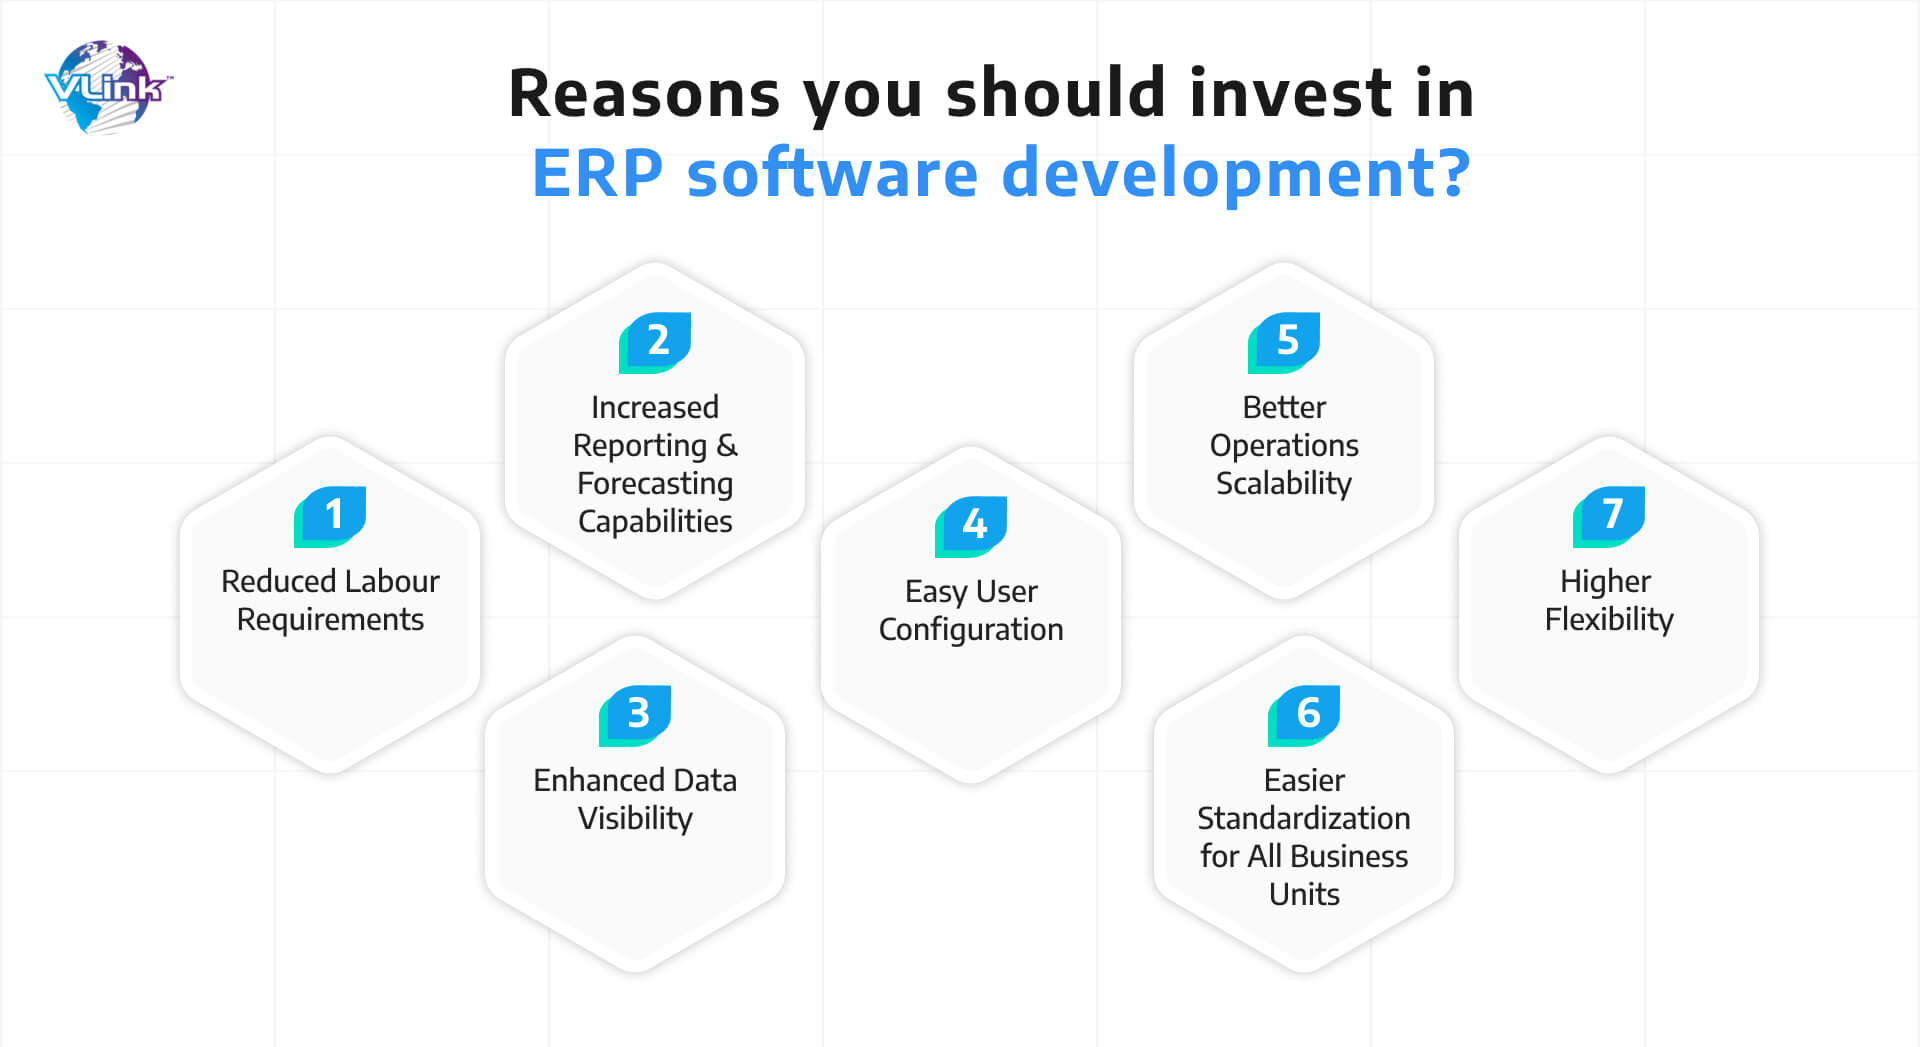 Why Should You Invest in ERP Software Development